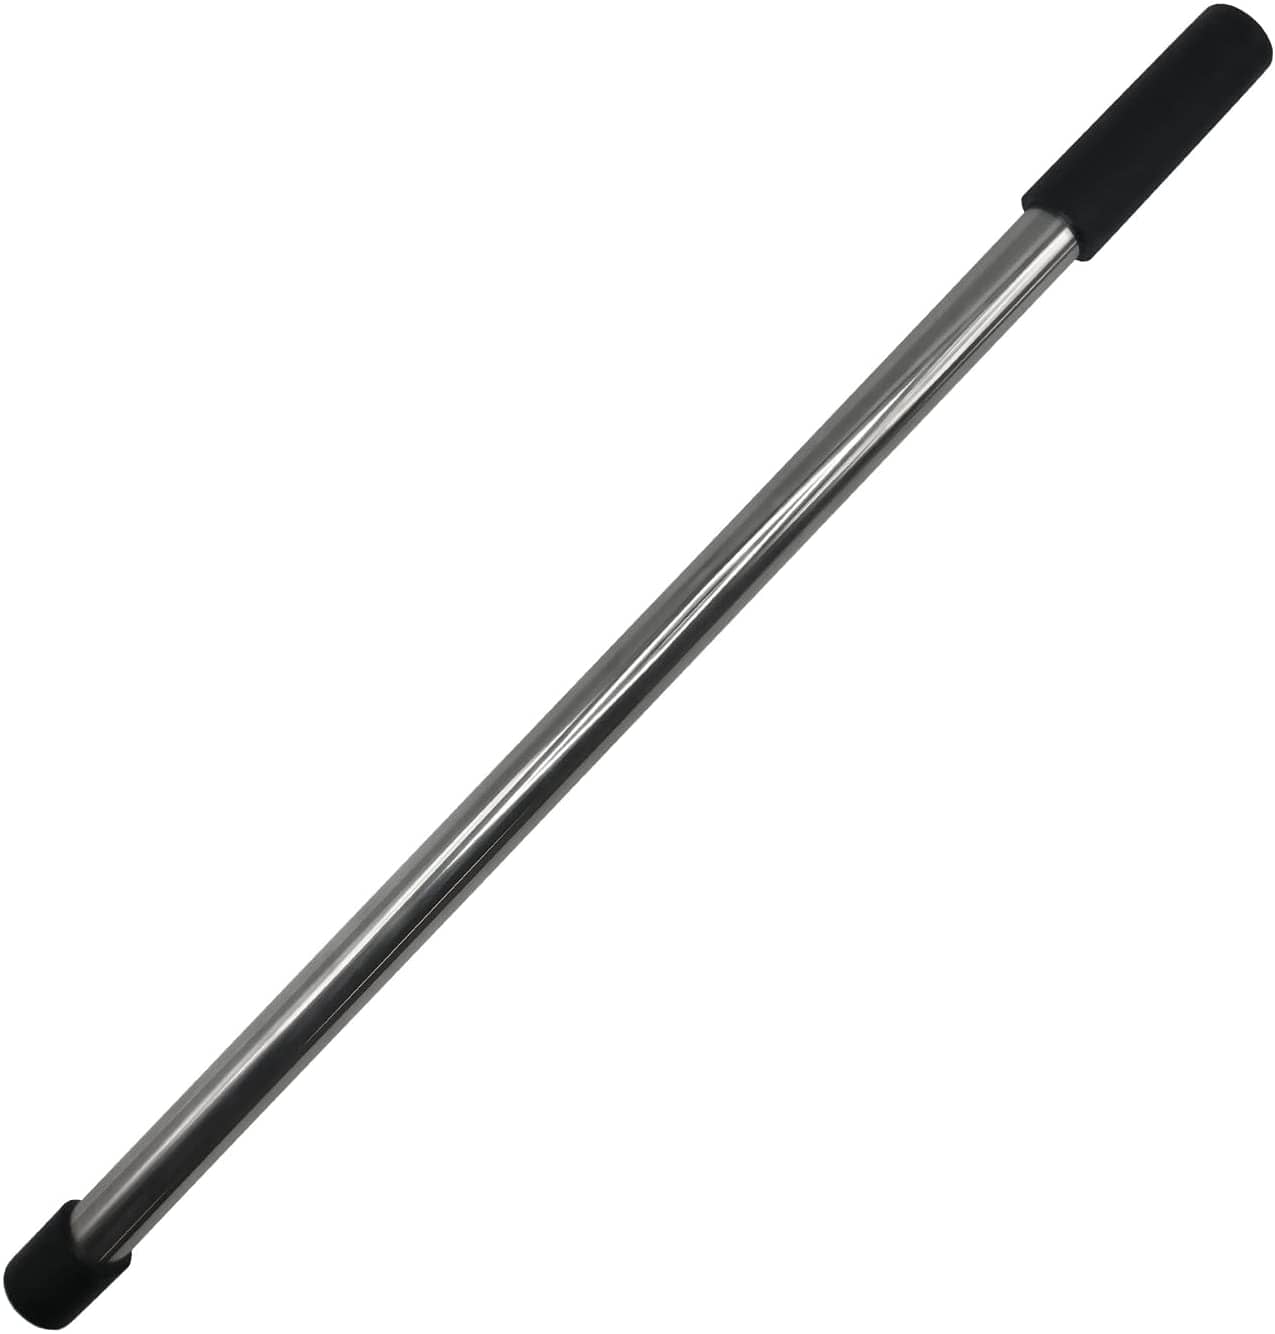 Poolzilla Stainless Steel Installation Rod for Safety Cover Springs, 24